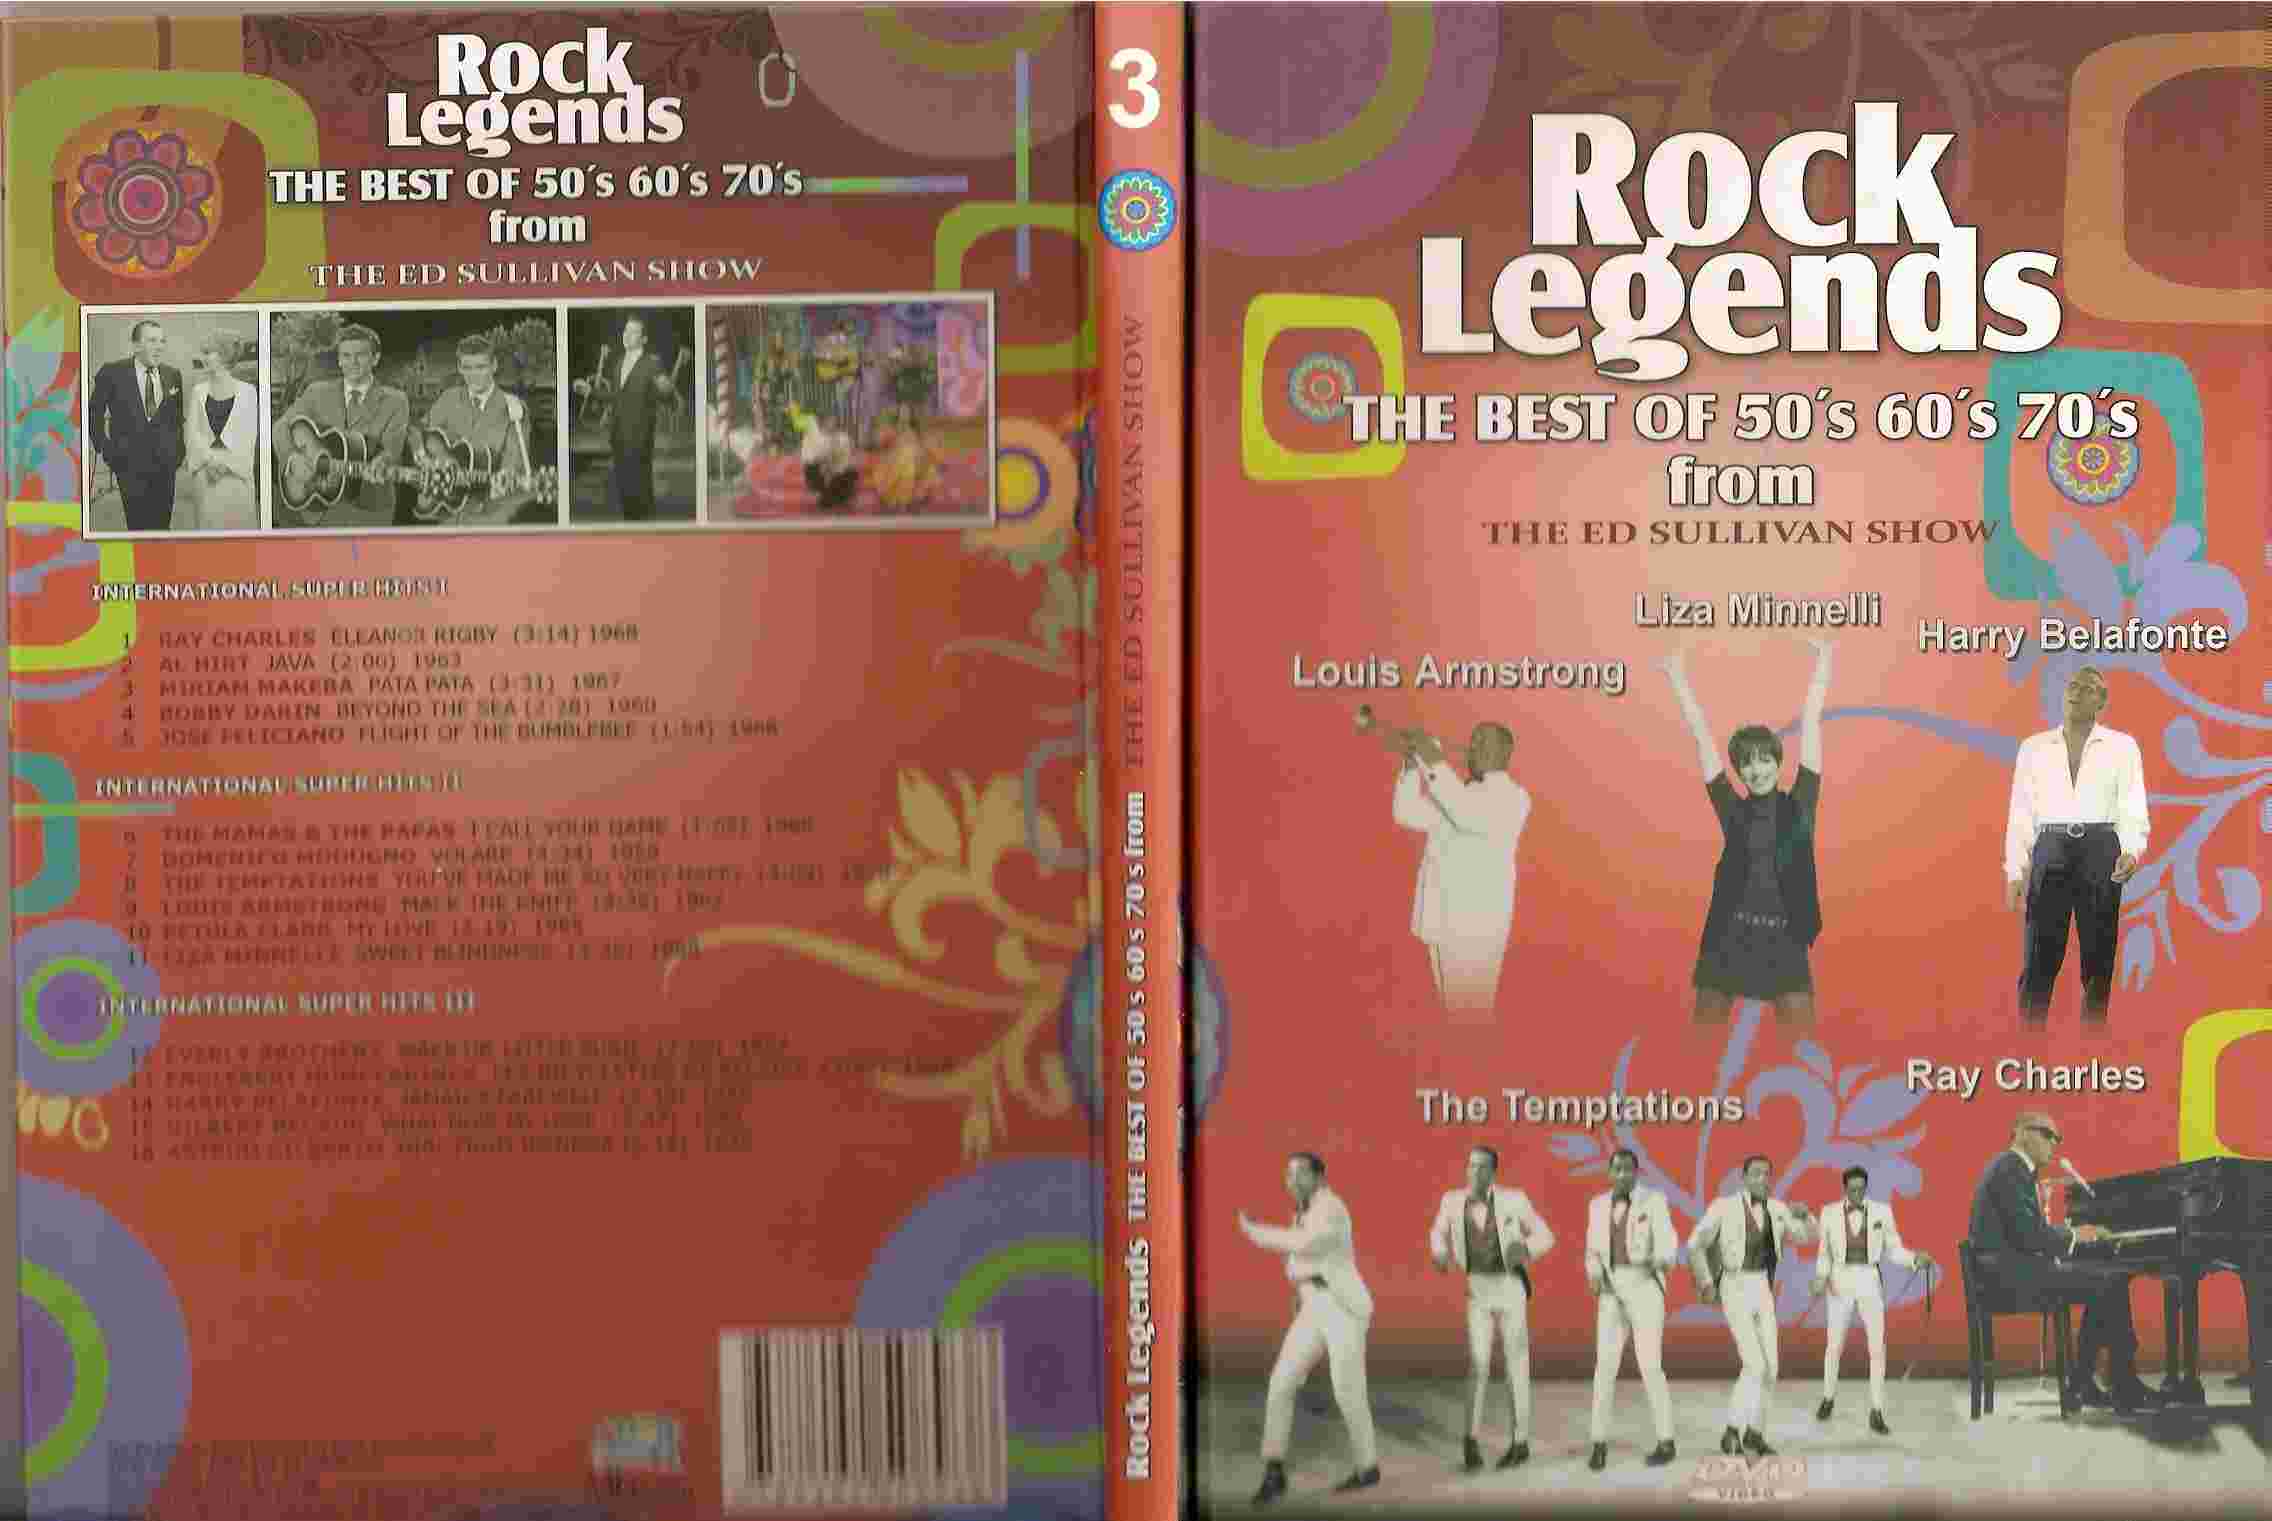 Rock Legends The Best Of 50s 60s 70s from The Ed Sullivan Show